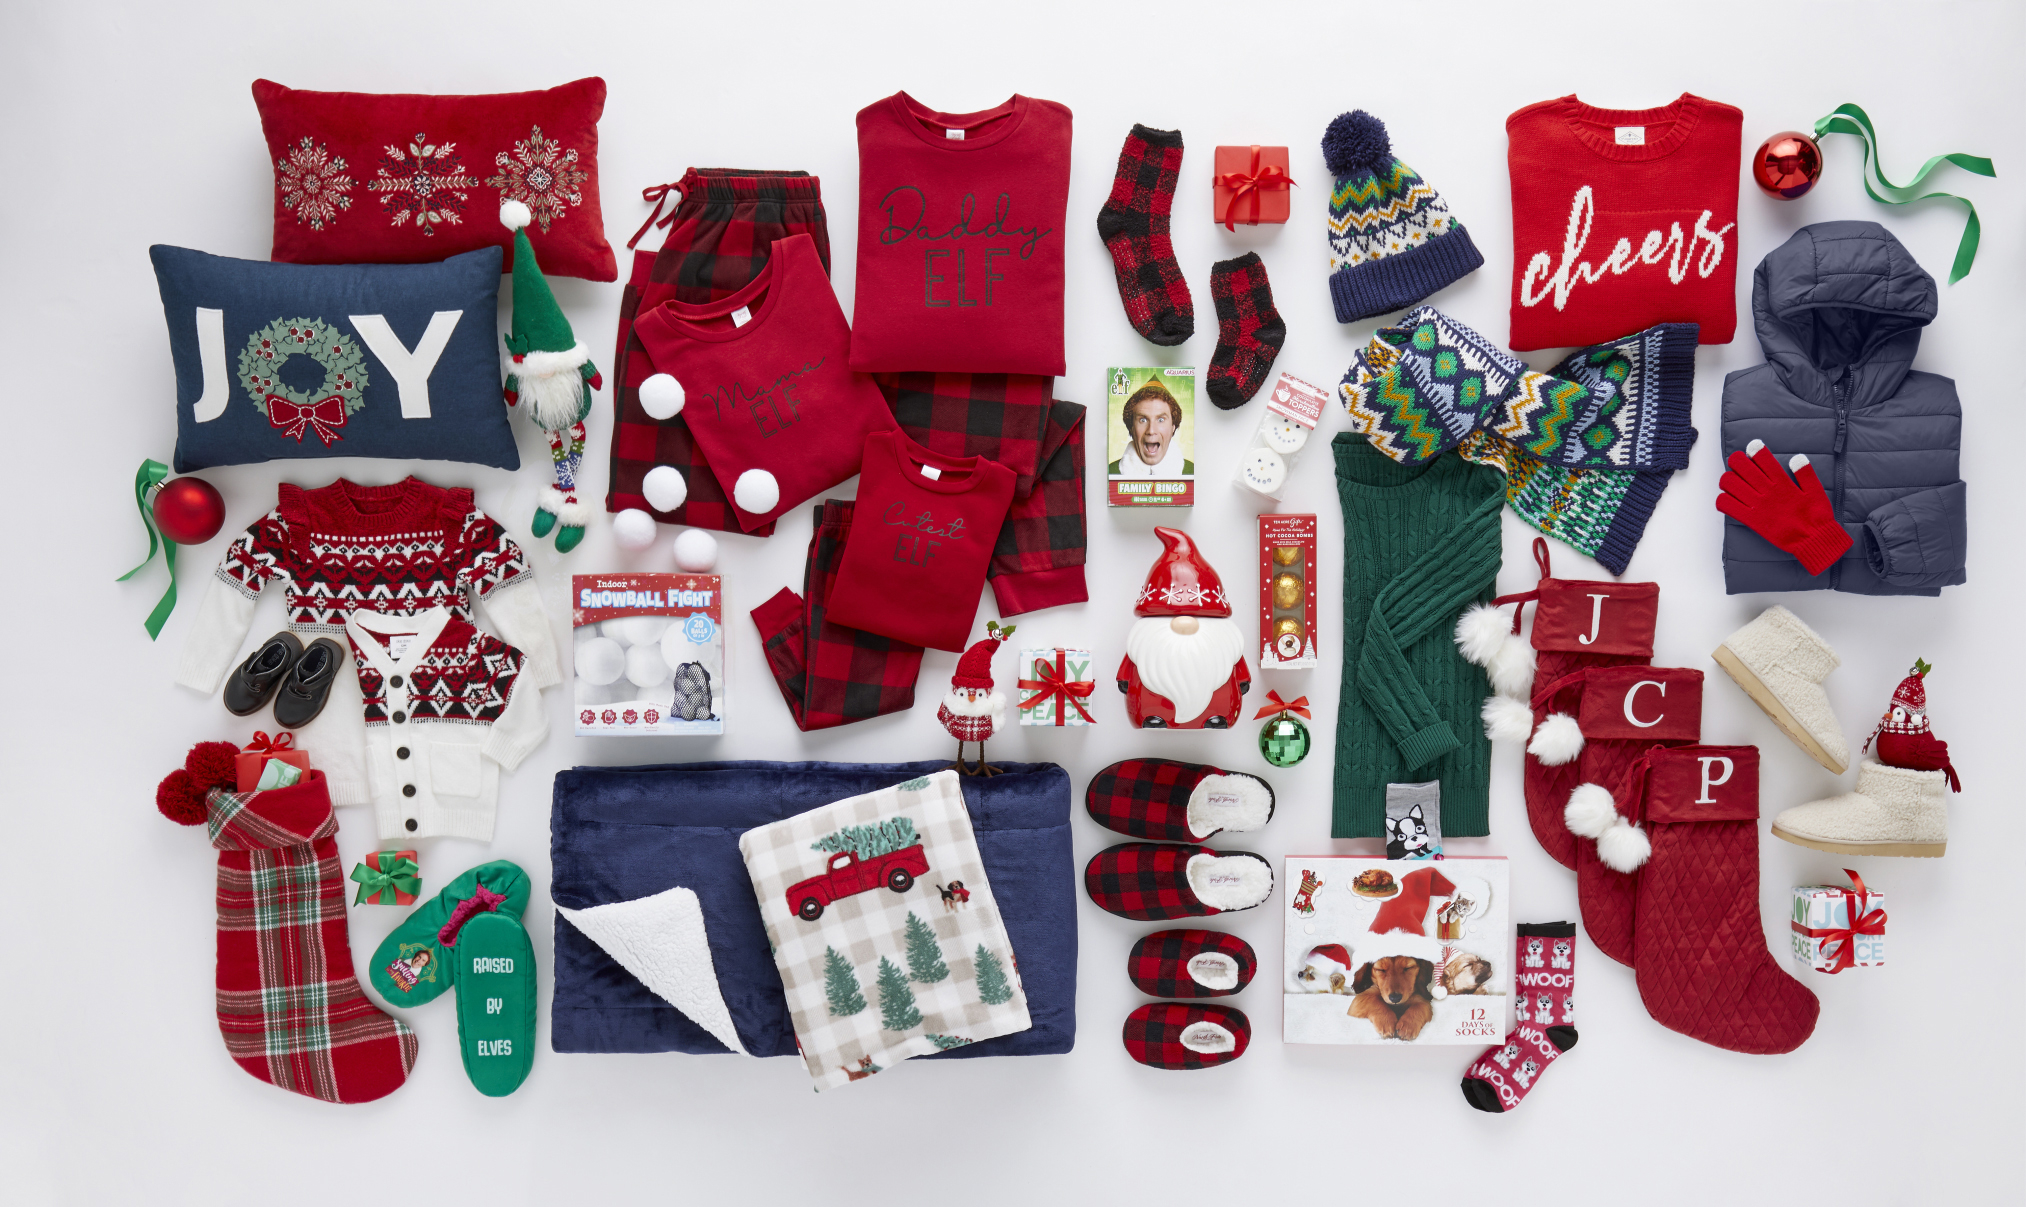 JCPenney Portraits - 'Tis the season to start planning family